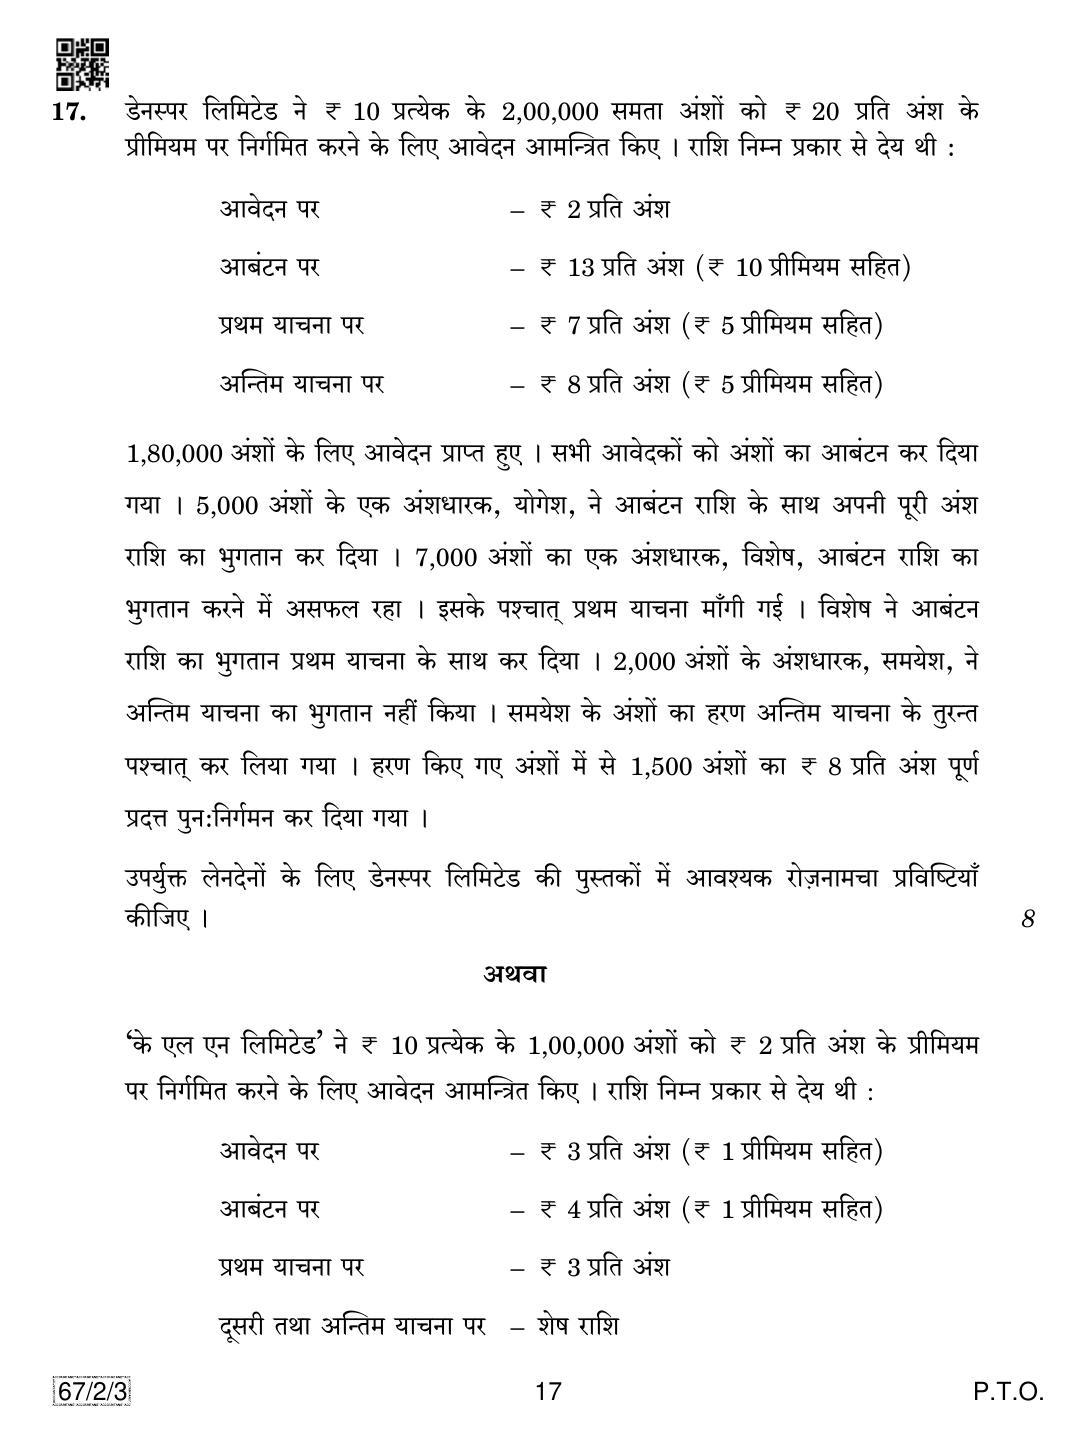 CBSE Class 12 67-2-3 Accountancy 2019 Question Paper - Page 17